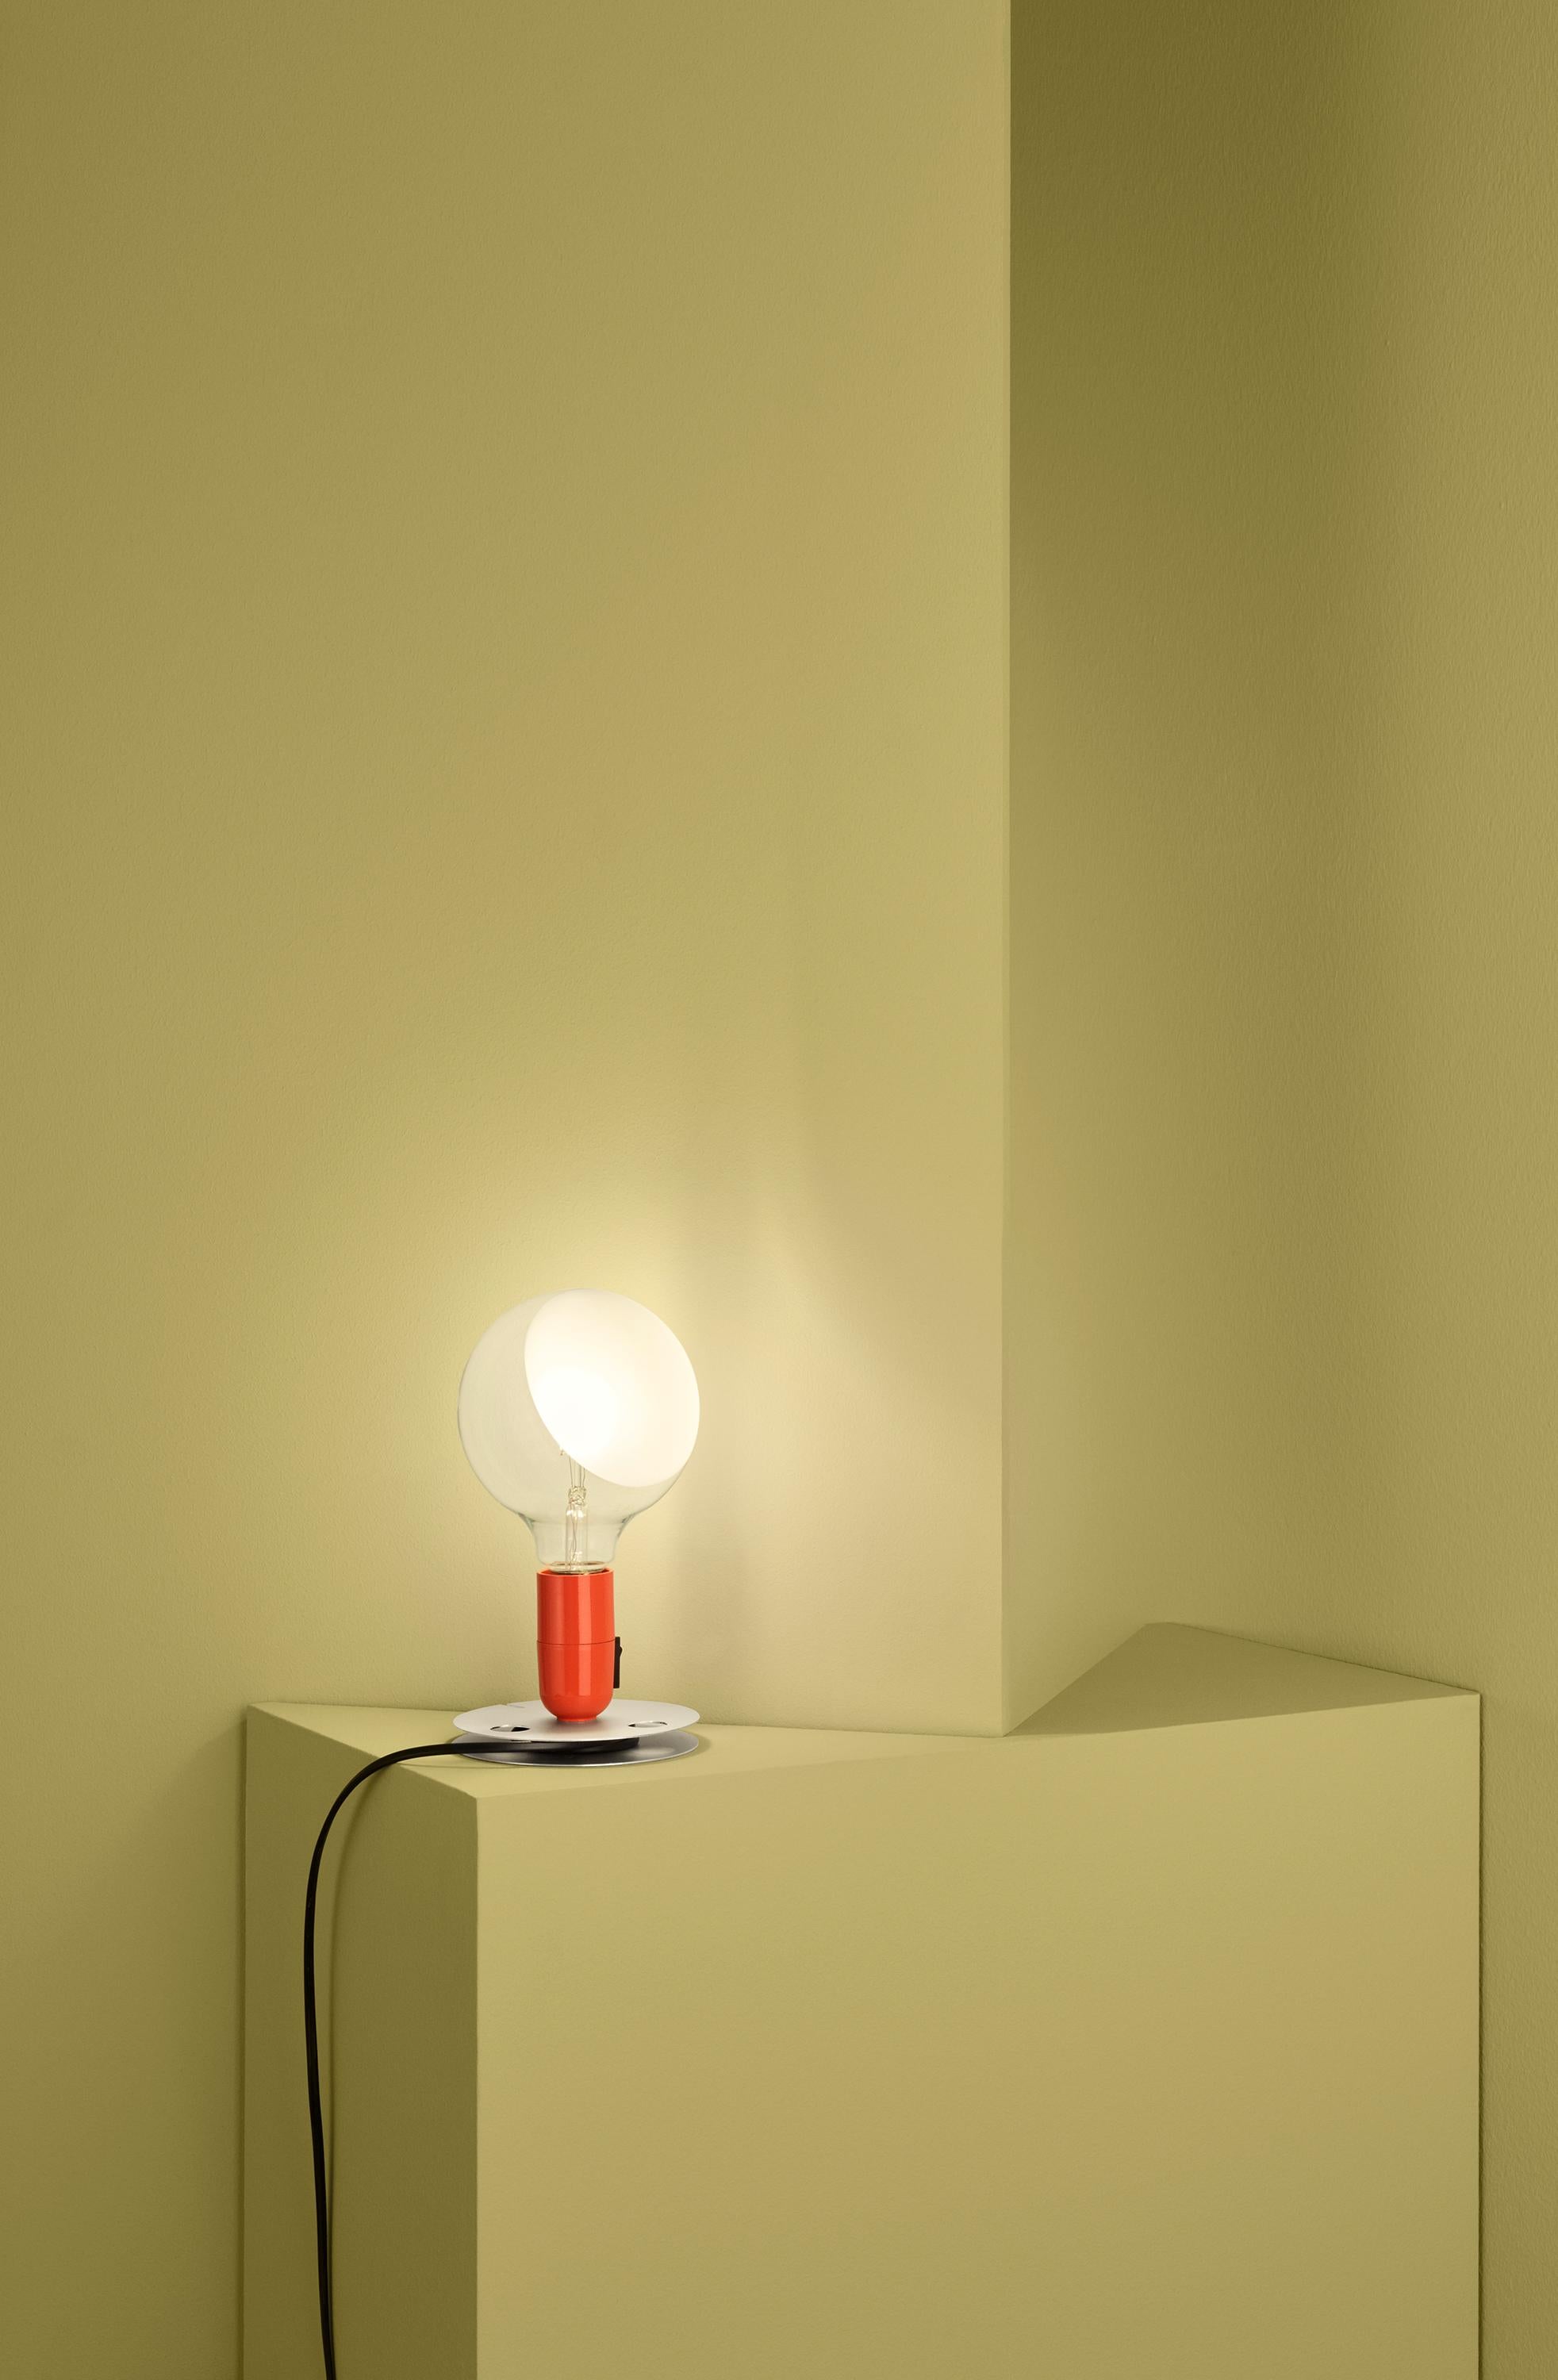 LED Lampadina Lamp

Its name means, literally, “bulb,” and it’s easy to see why with one look at this playful Achille Castiglioni design. This unique table lamp provides direct and diffused light through a partly sandblasted clear globe. Its base is